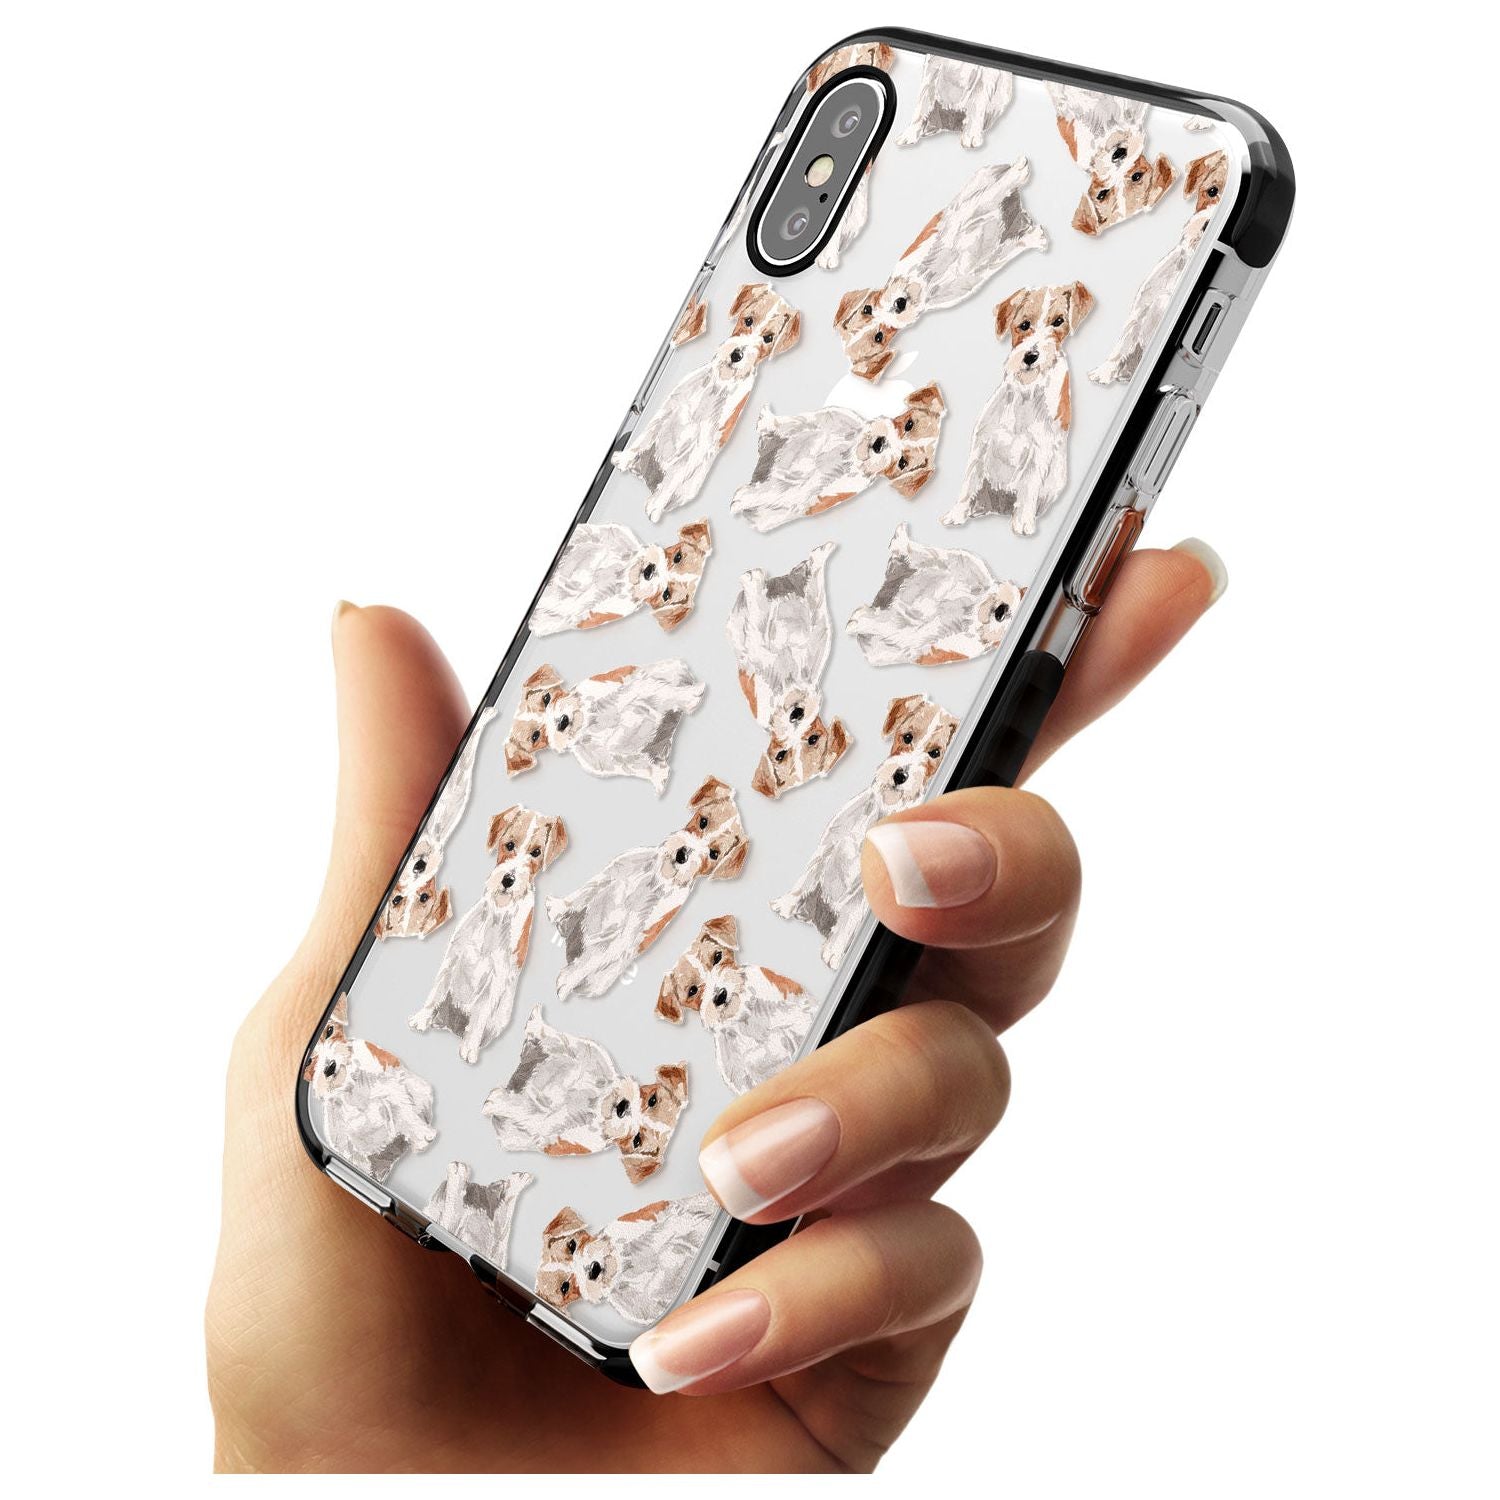 Wirehaired Jack Russell Watercolour Dog Pattern Black Impact Phone Case for iPhone X XS Max XR